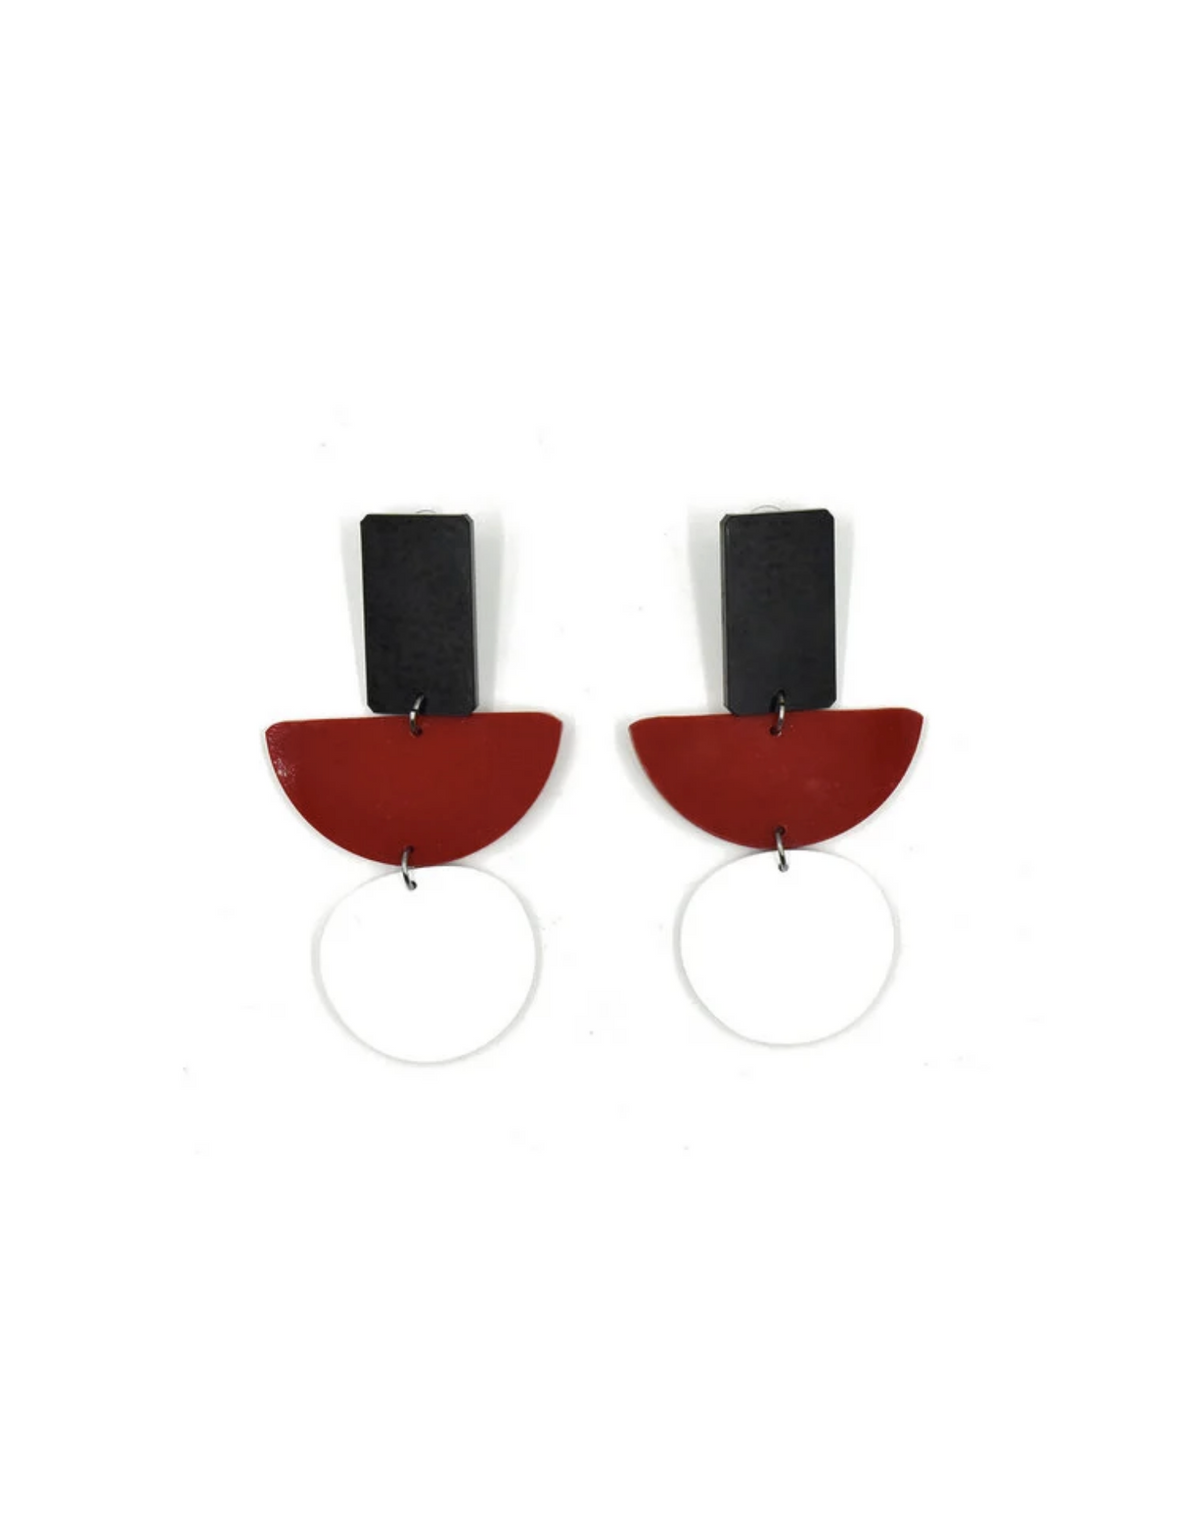 CB456 - Half Moon earrings in White and Red